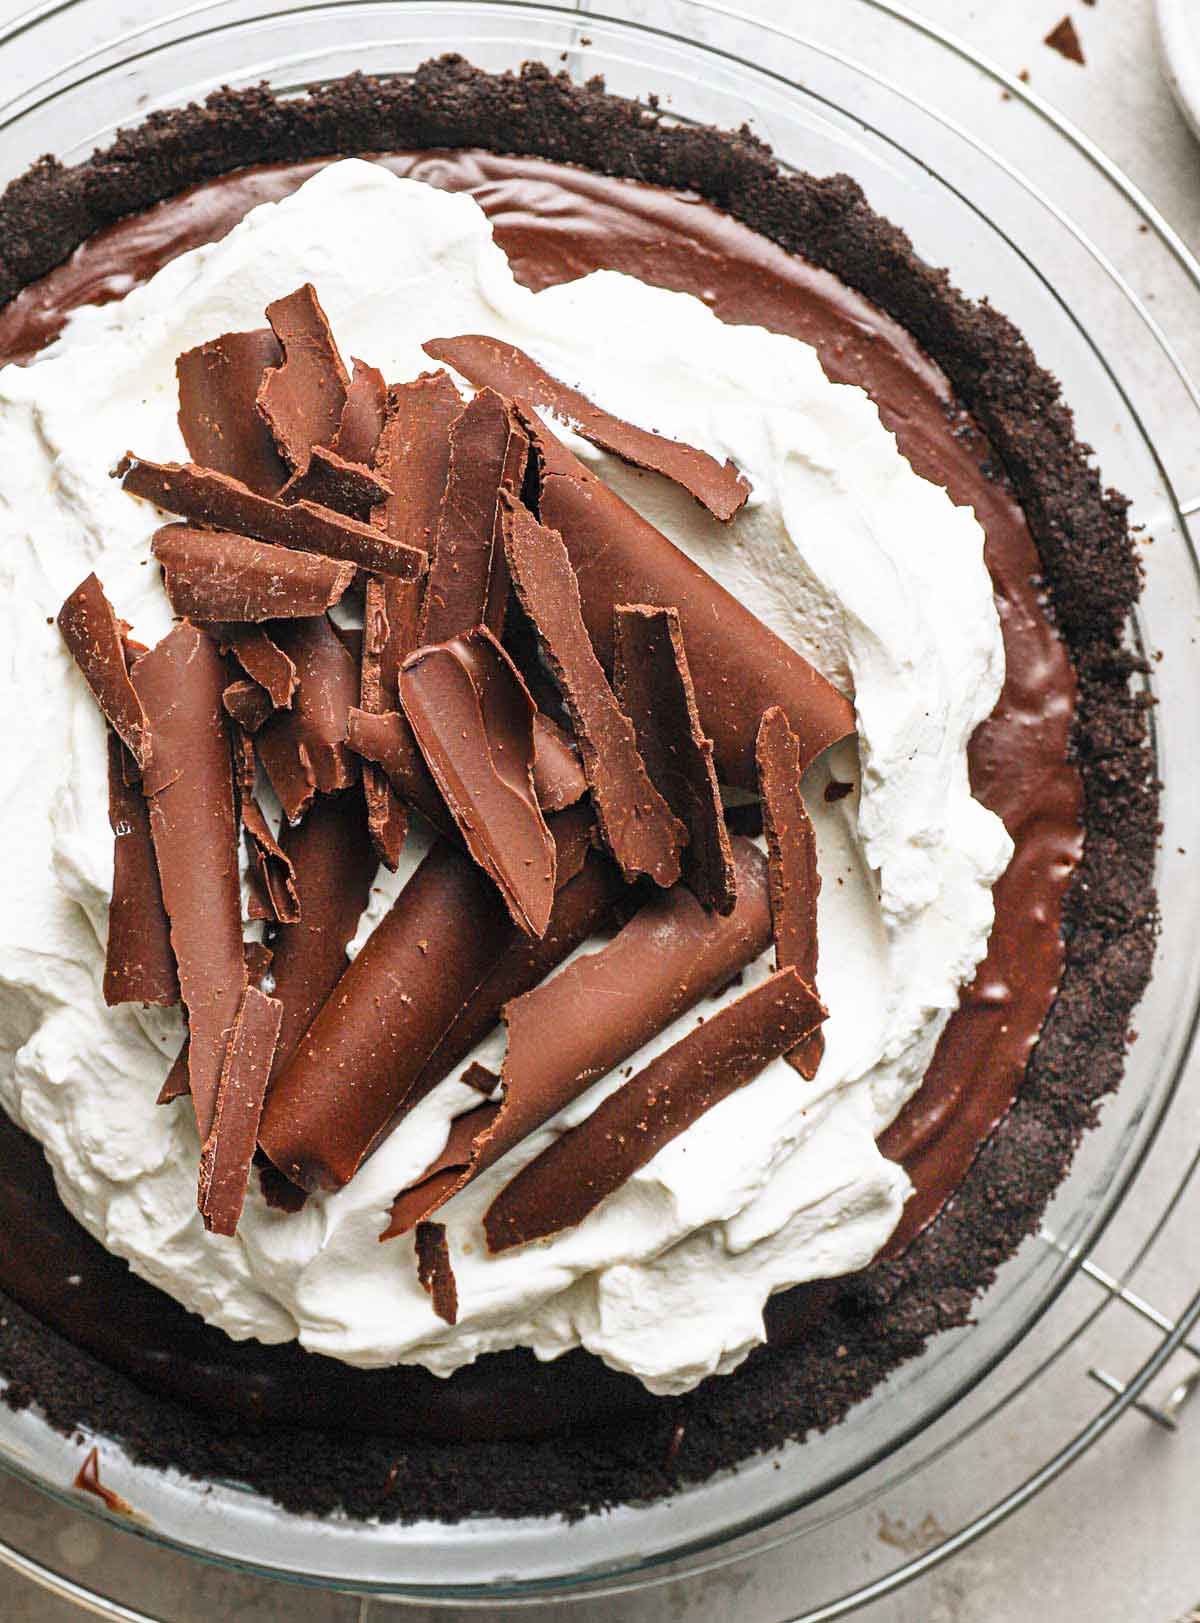 Overhead photo of chocolate cream pie in glass pie plate topped with whipped cream and chocolate curls.